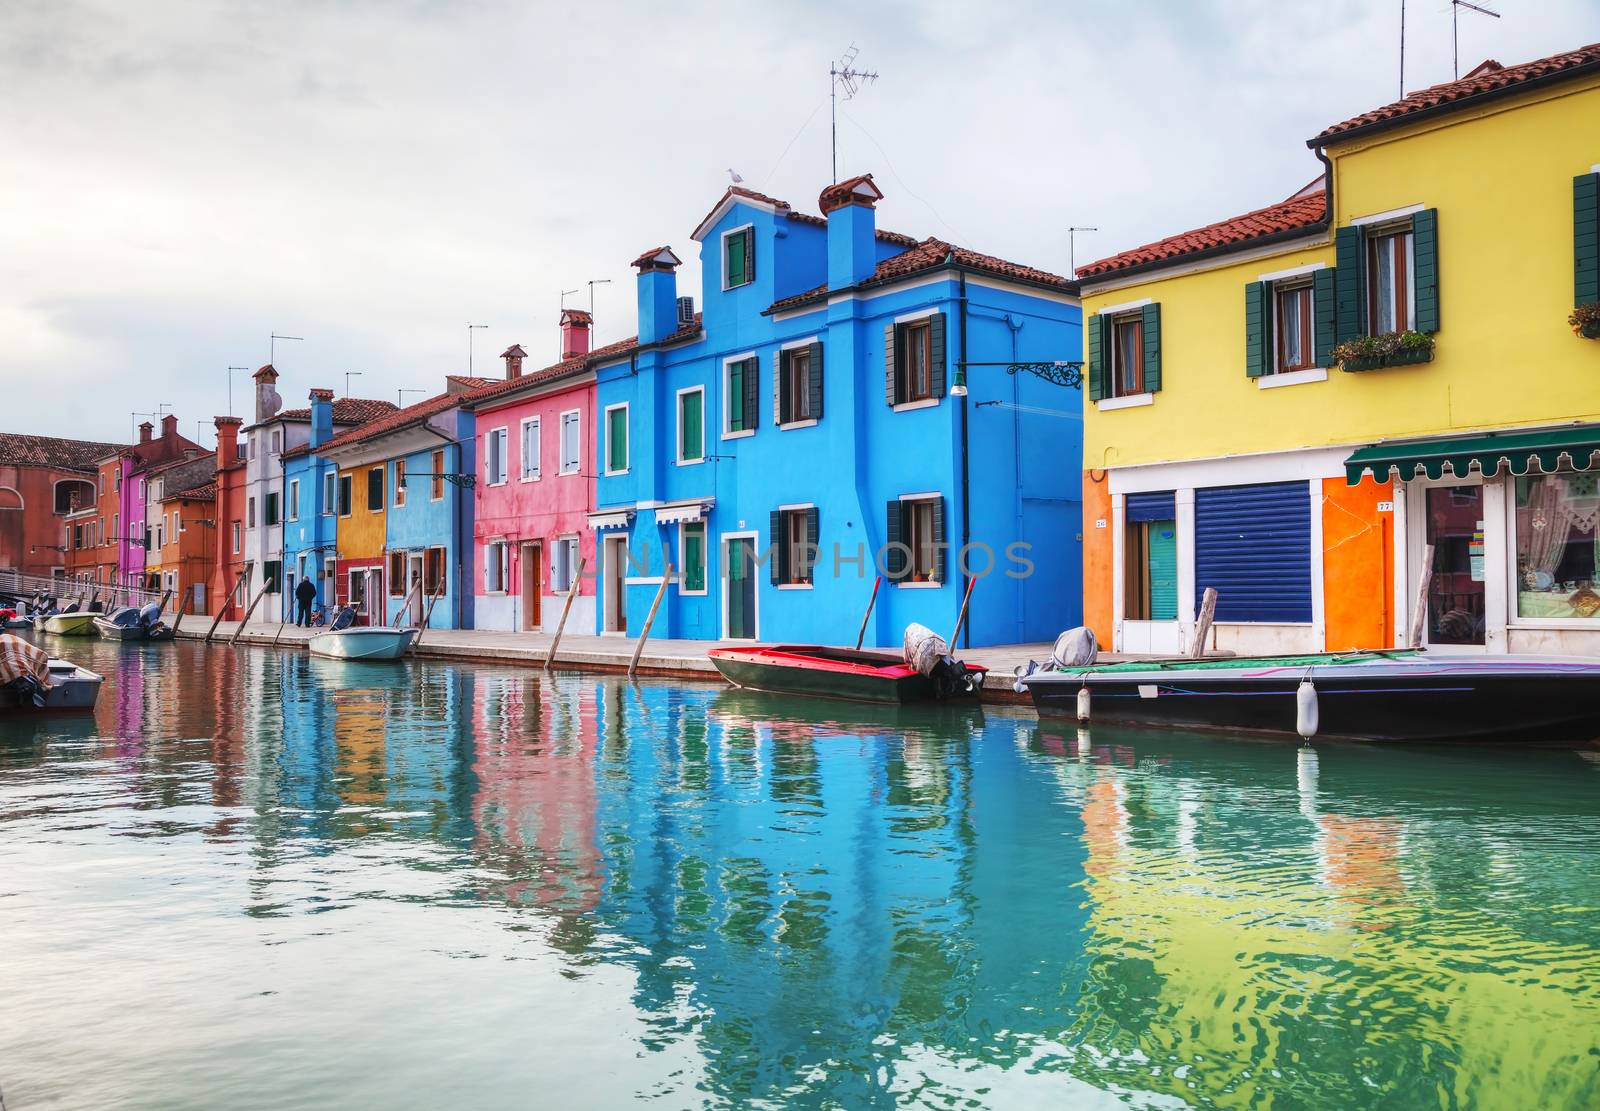 Overview of the Burano canal by AndreyKr